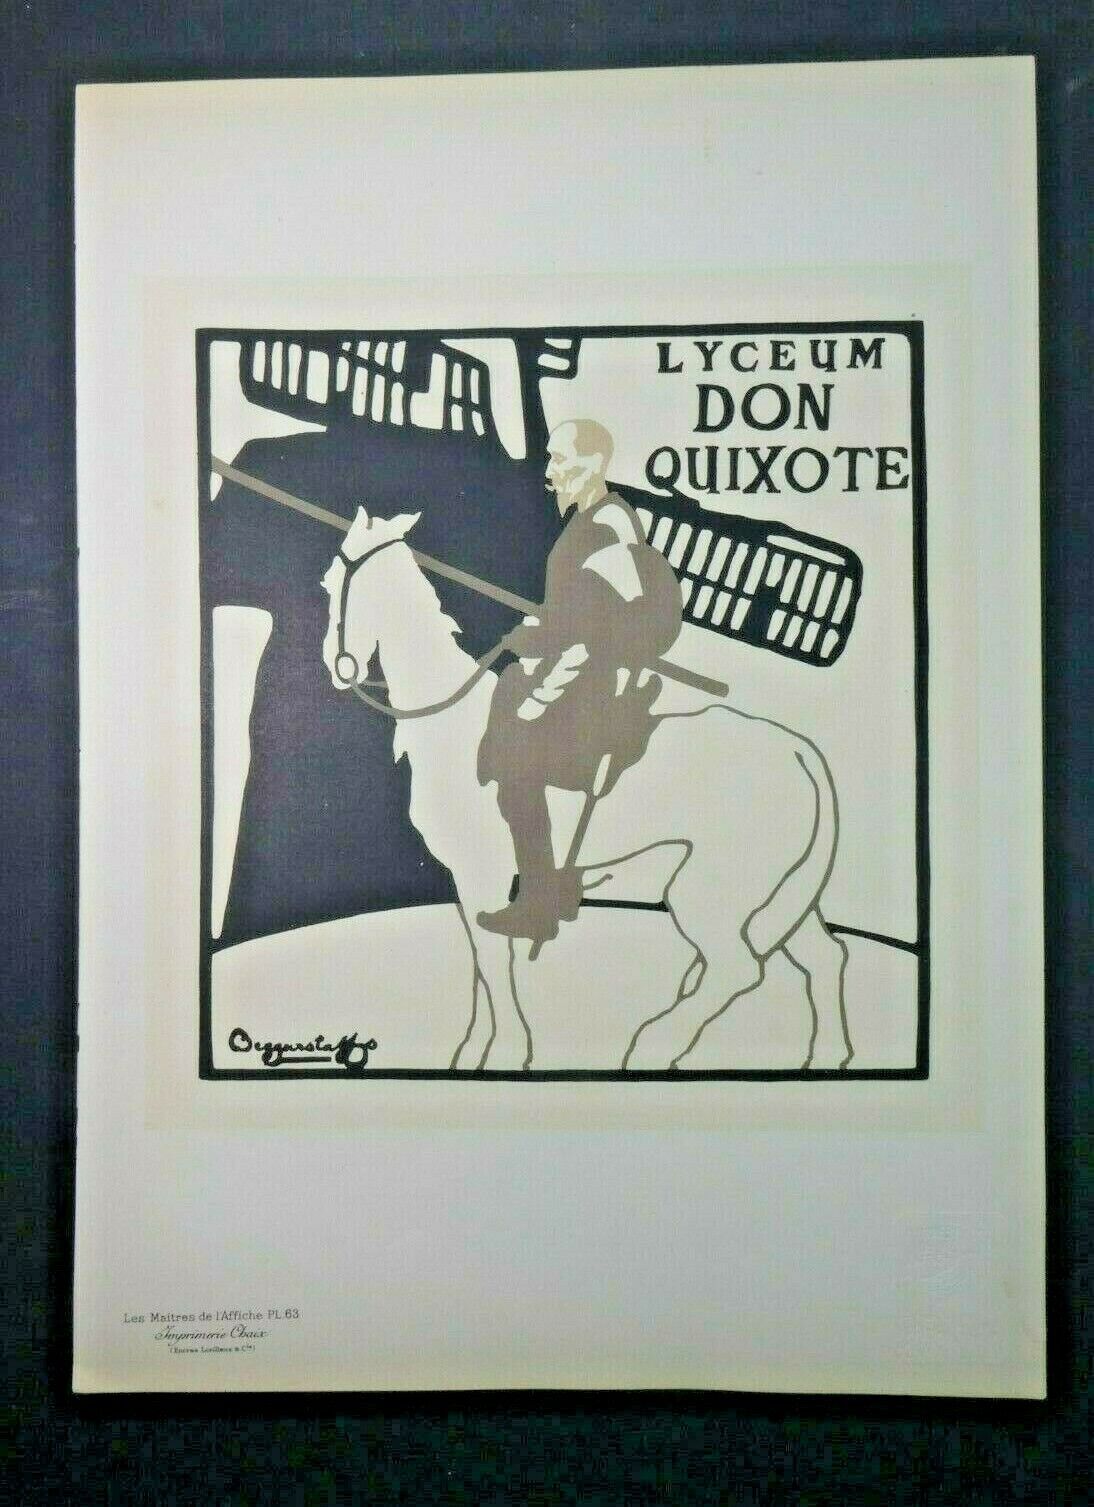 Masters of the Poster Pl. 63, Beggarstaff: Don Quixote, for Theatre Lyceum 1896